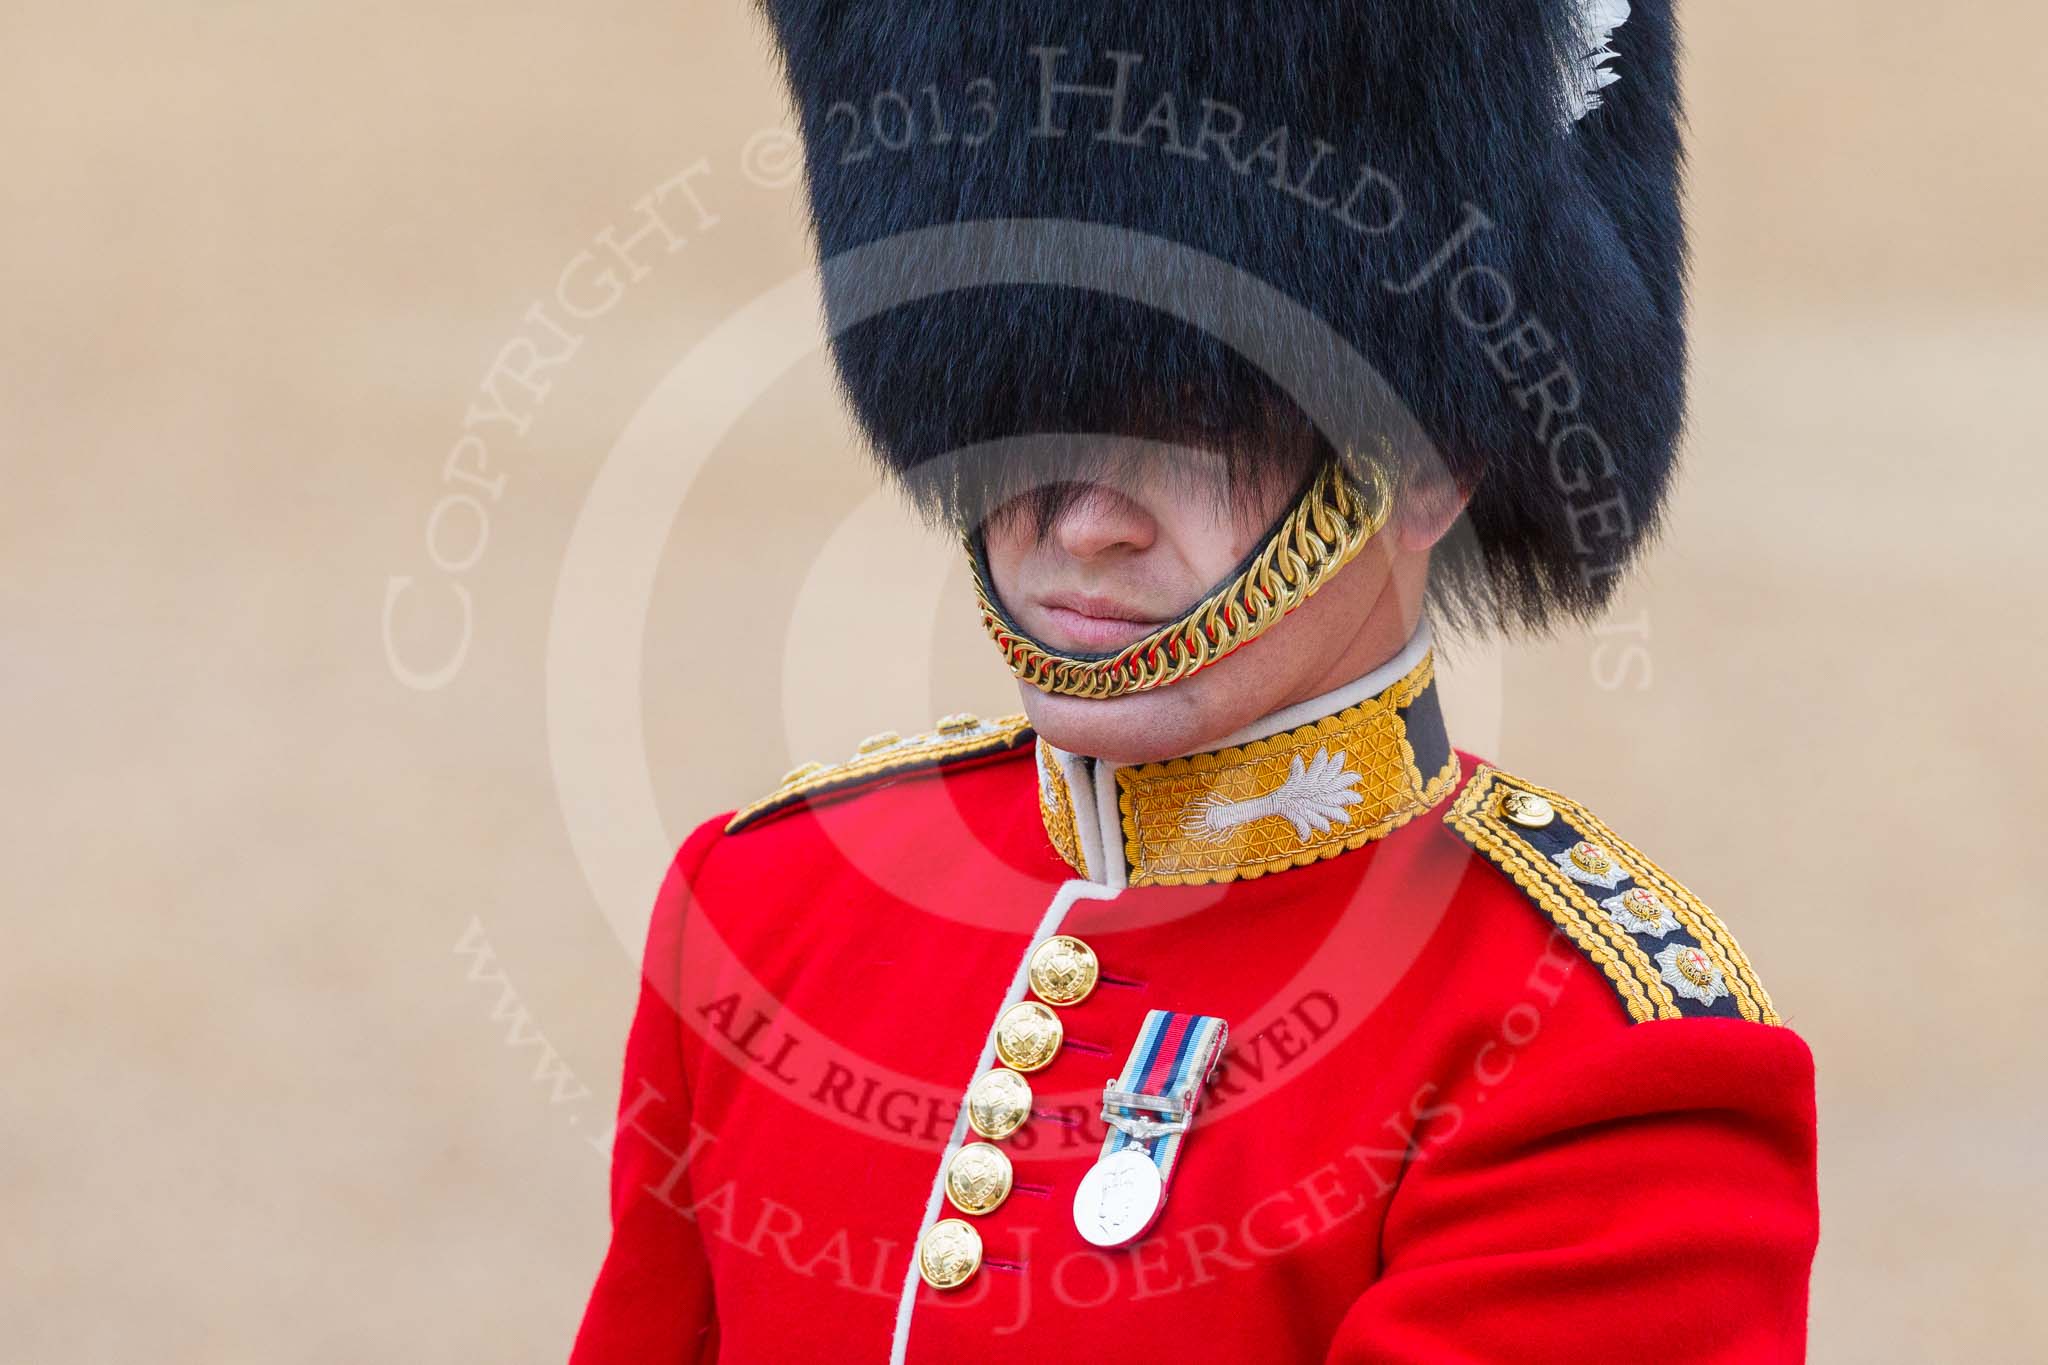 Trooping the Colour 2015. Image #153, 13 June 2015 10:40 Horse Guards Parade, London, UK